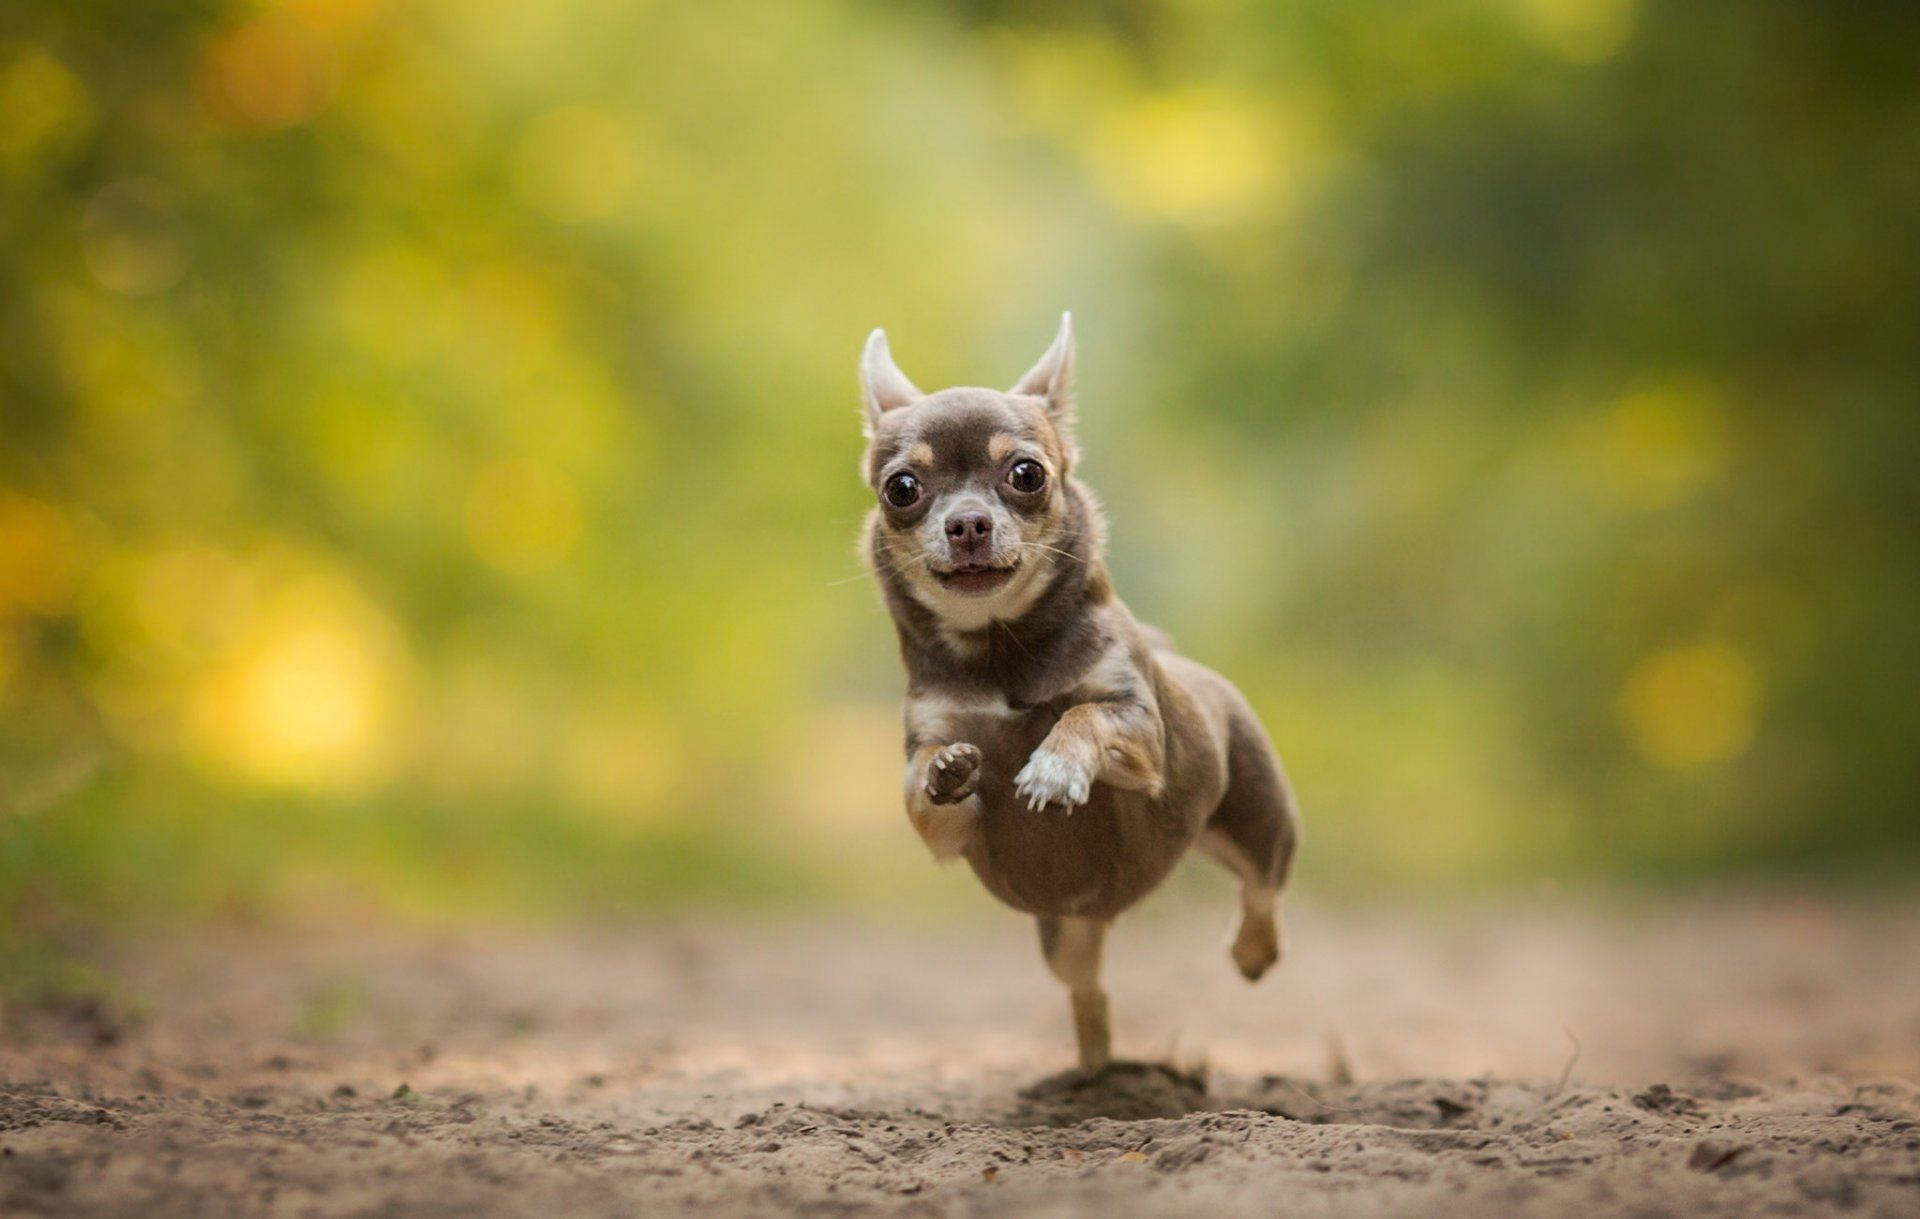 Chihuahua Puppy Running Photography Wallpaper